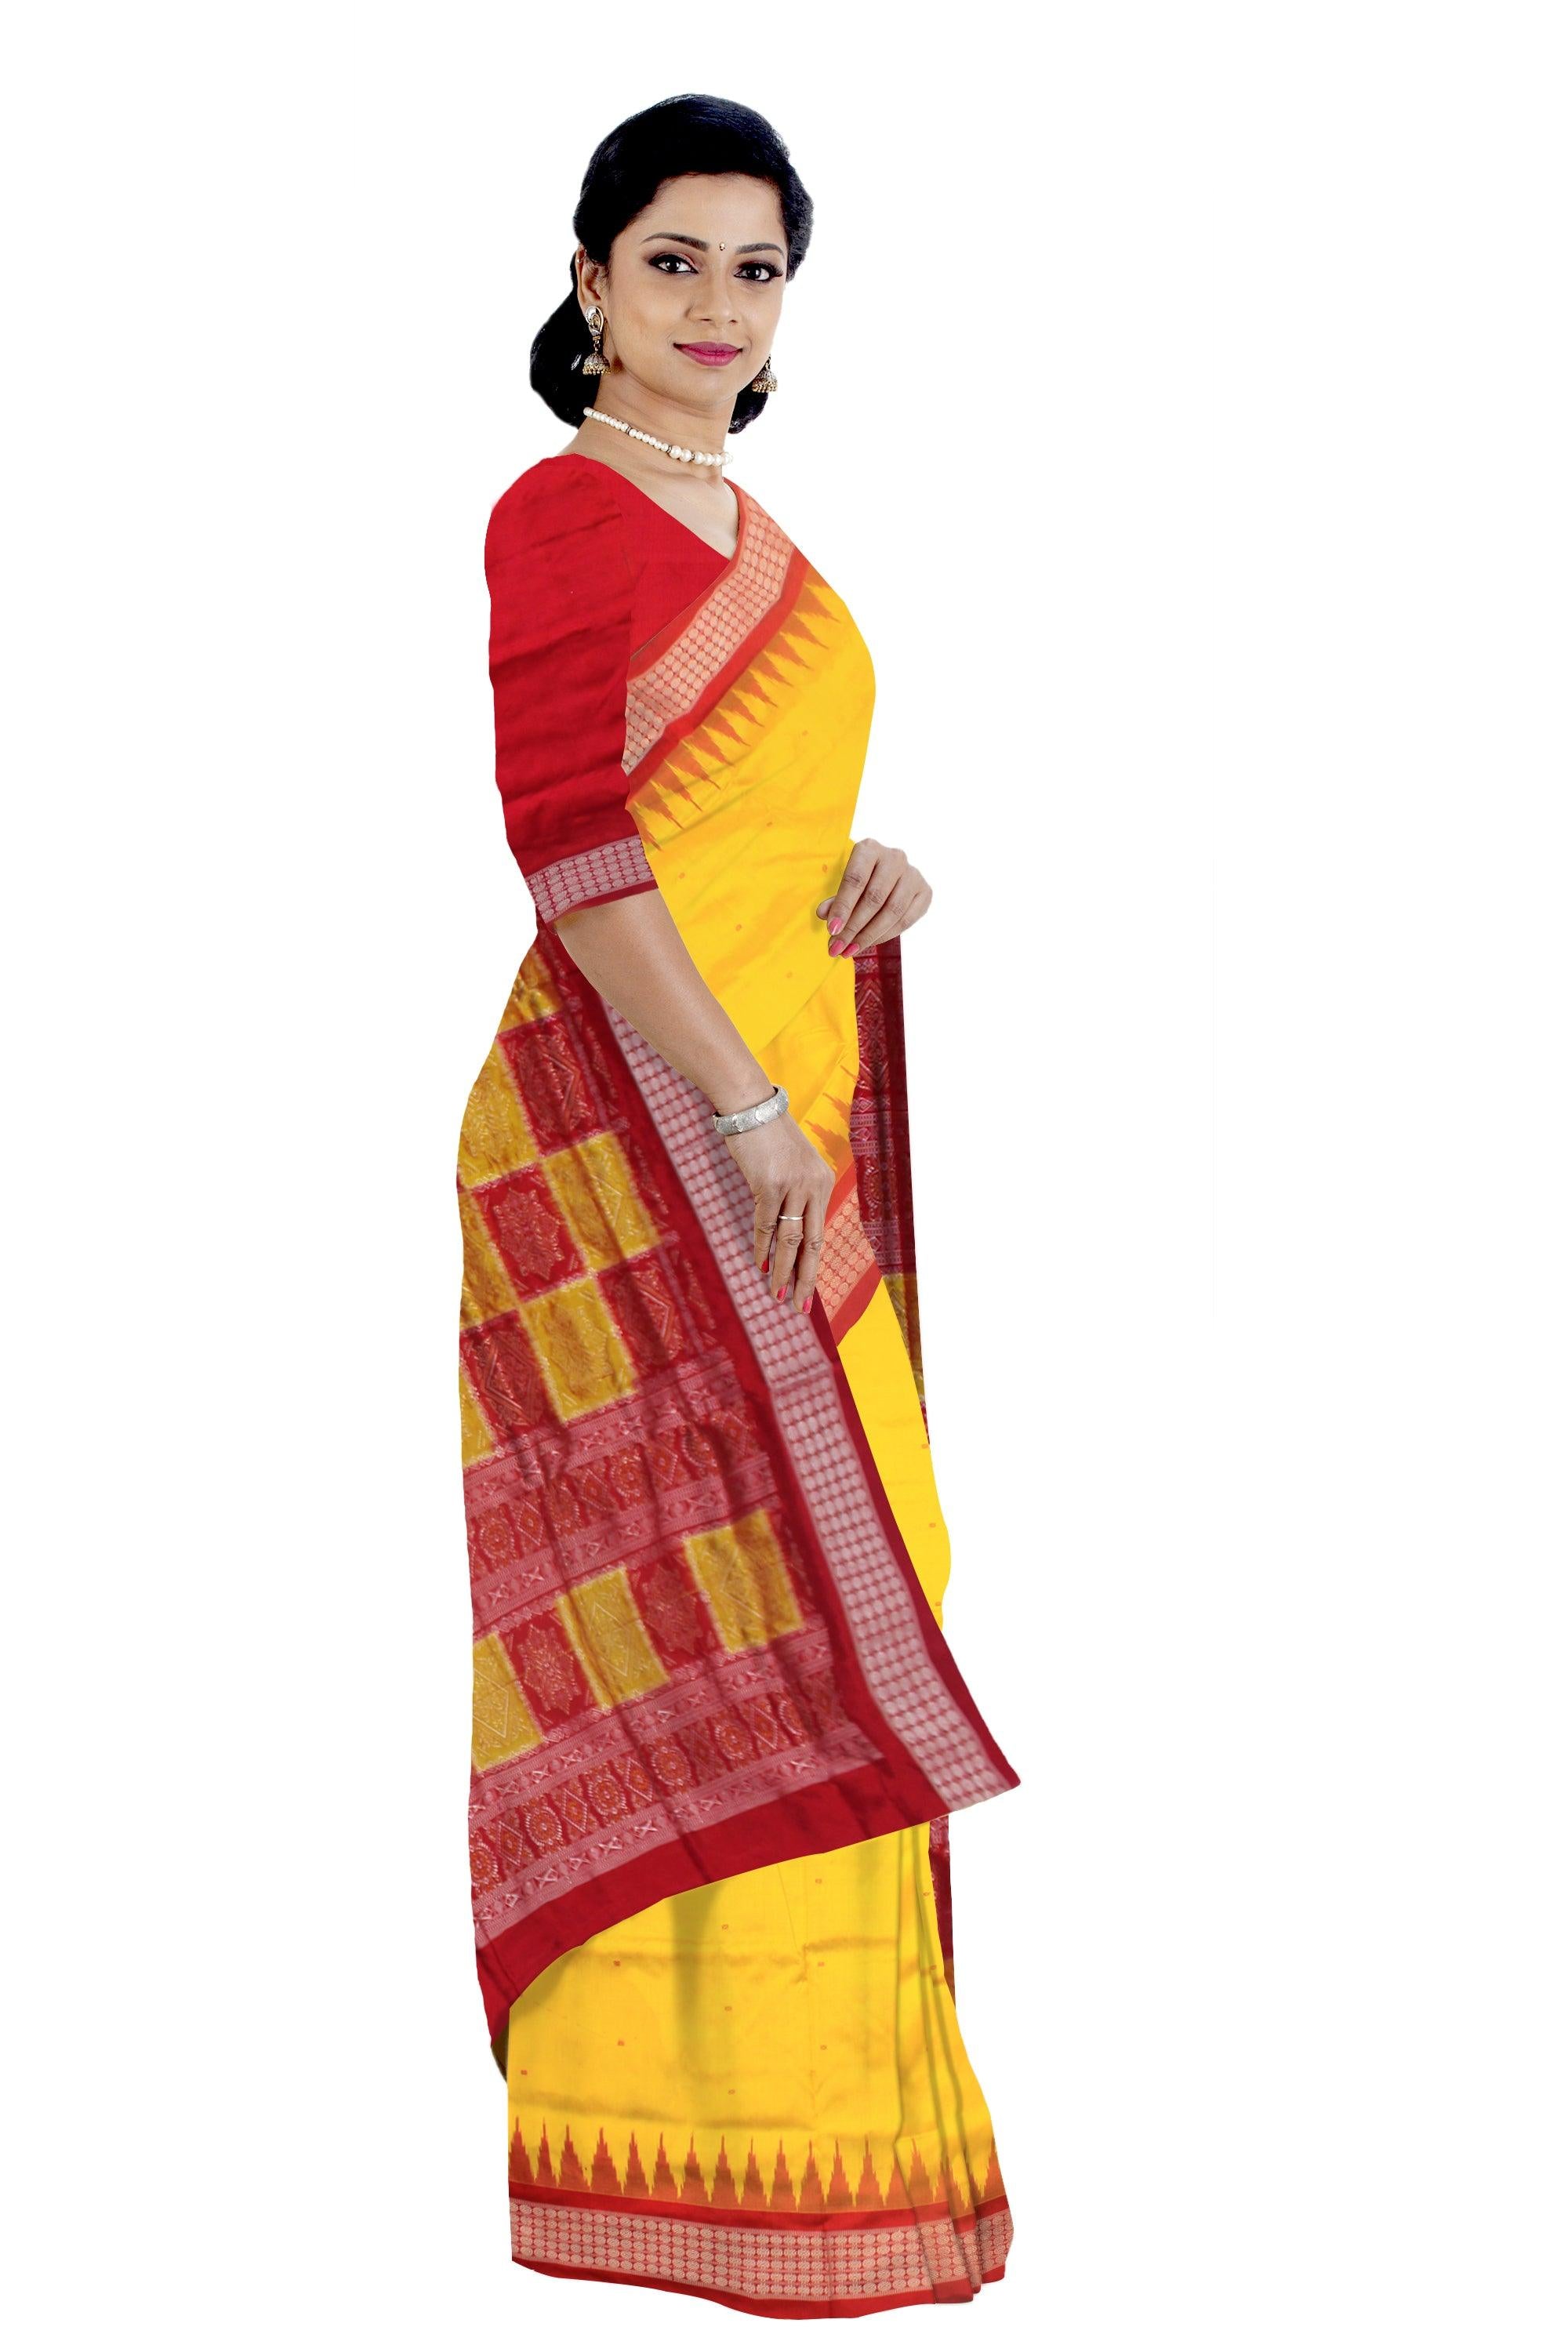 MARRIAGE COLLECTION PATA SAREE IN YELLOW AND RED COLOR BASE, WITH BLOUSE PIECE. - Koshali Arts & Crafts Enterprise